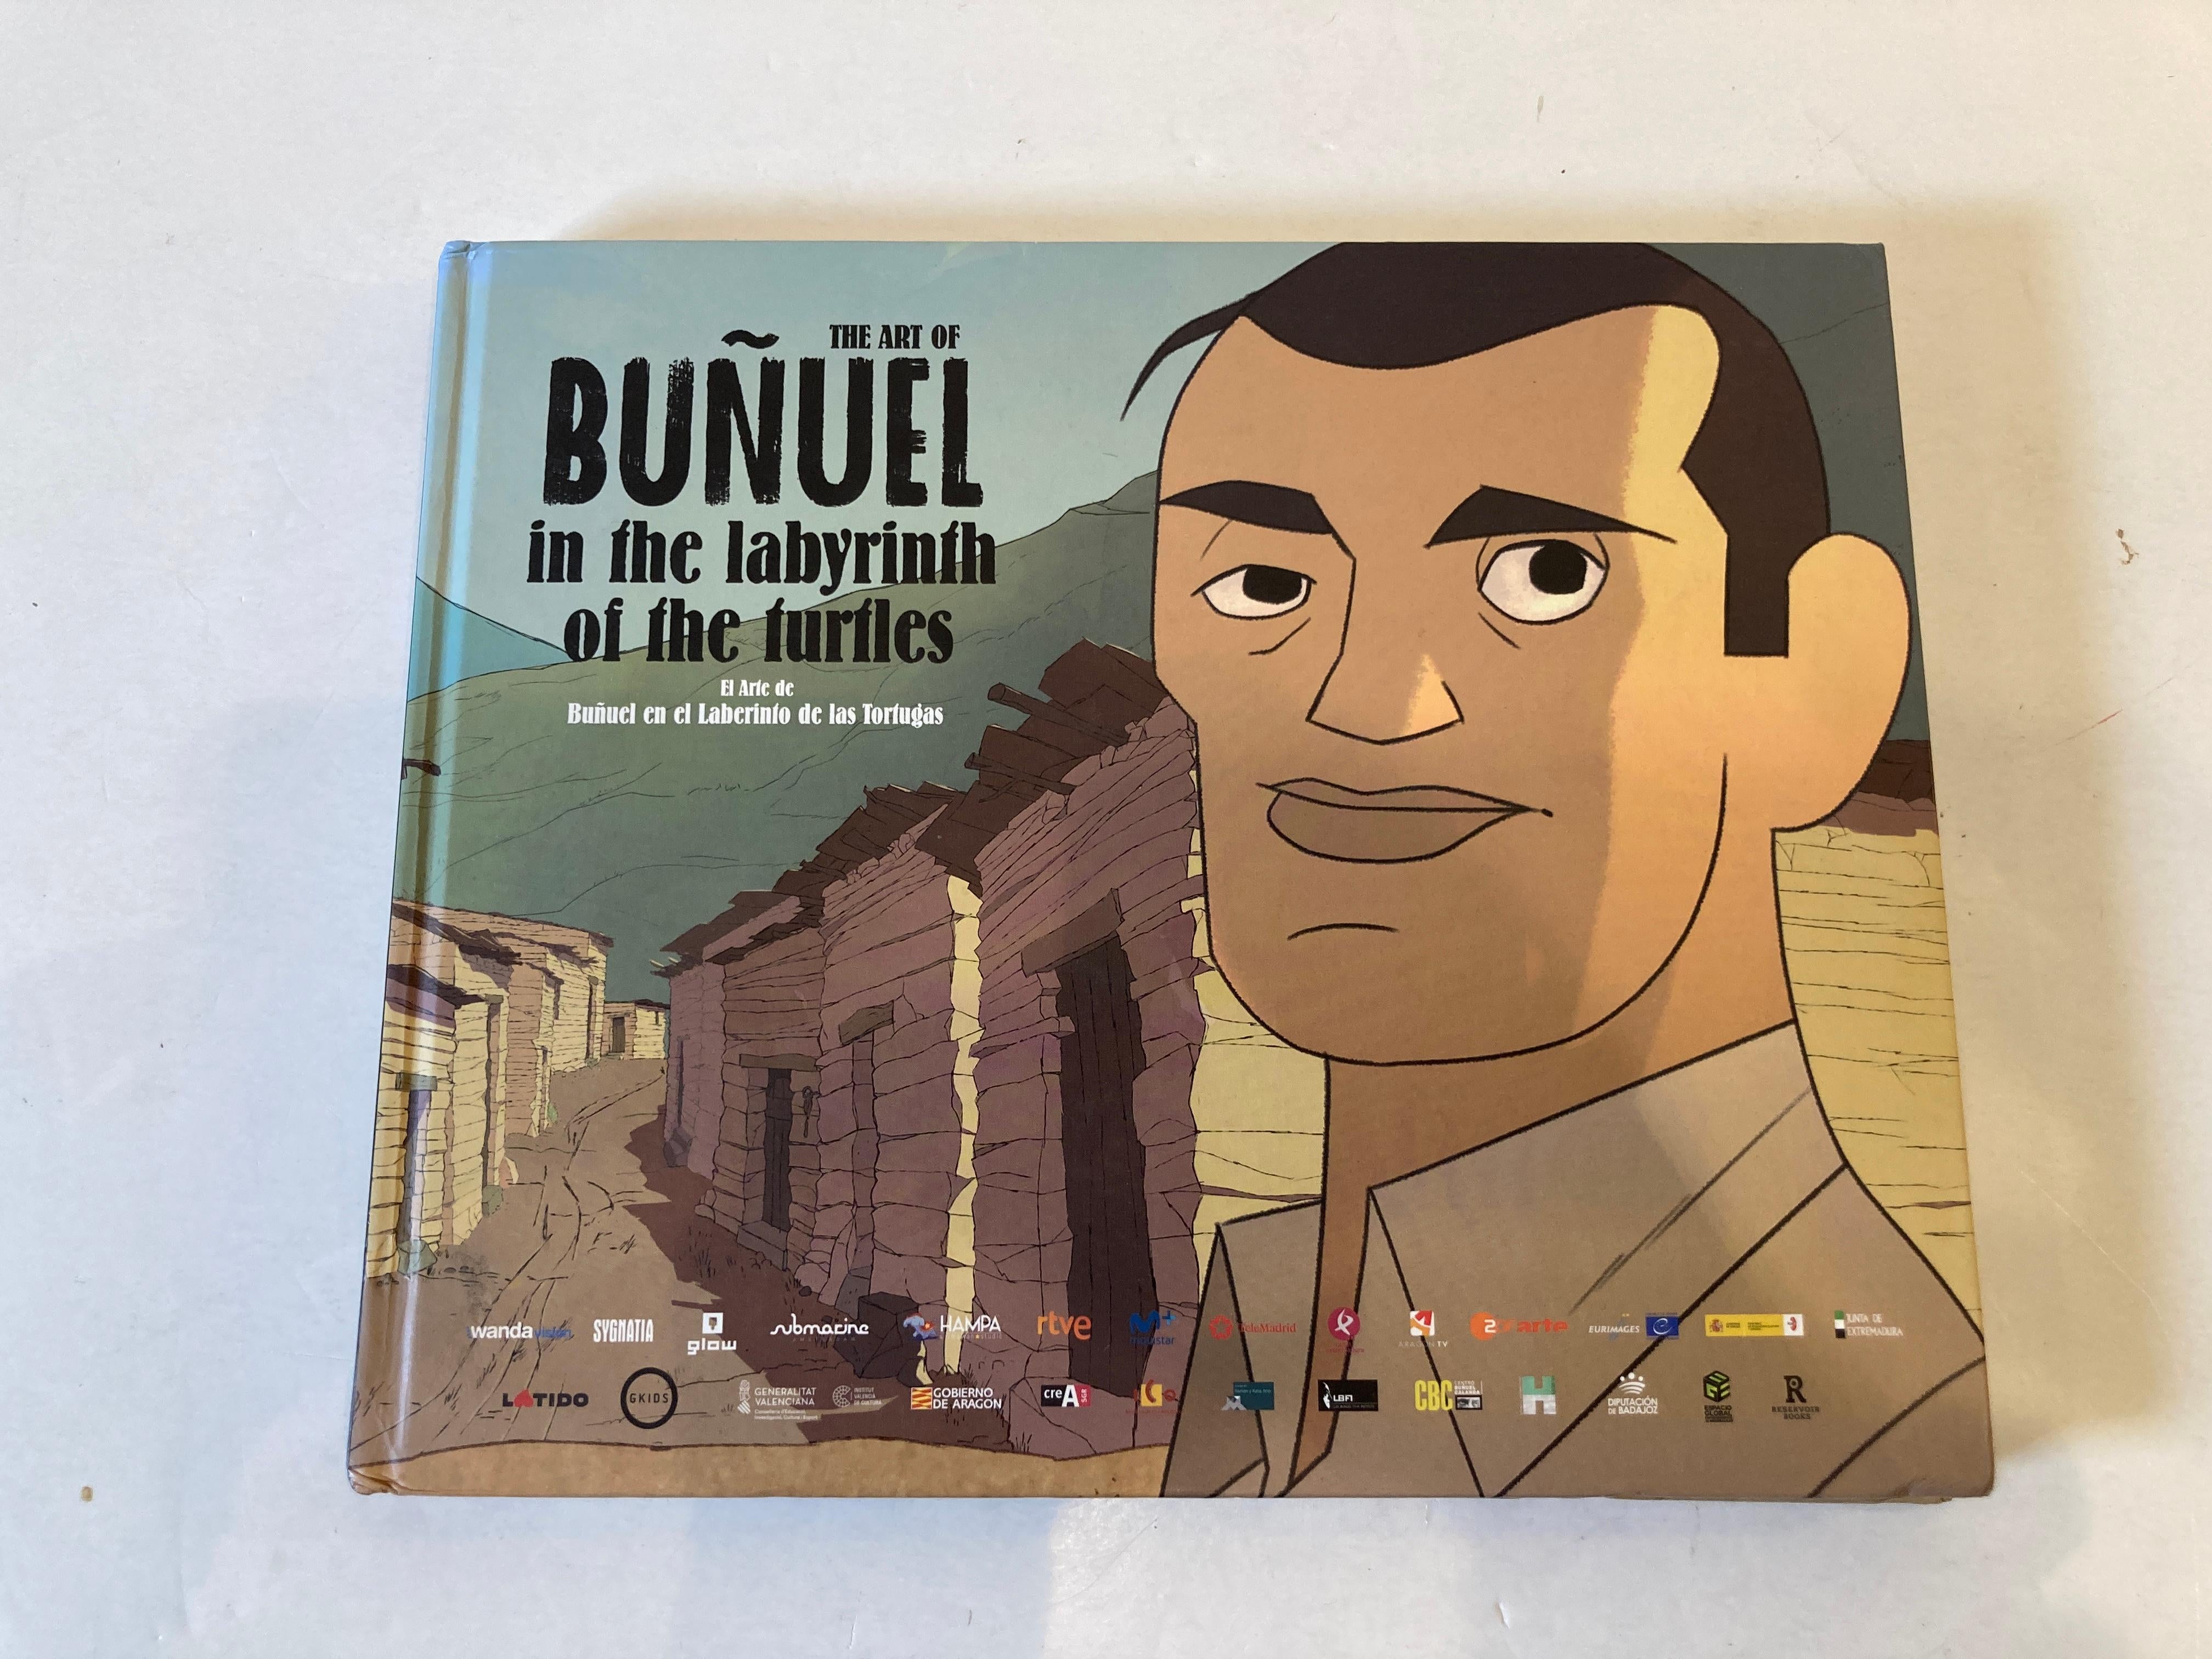 Buñuel in the Labyrinth of the Turtles. by Fermín Solís
1st Edition Hardcover
Metro Media Limited, 2019 - Biographical comic books, strips, etc - 120 pages
A fascinating portrait of a pivotal period in the life of Spanish filmmaker Luis